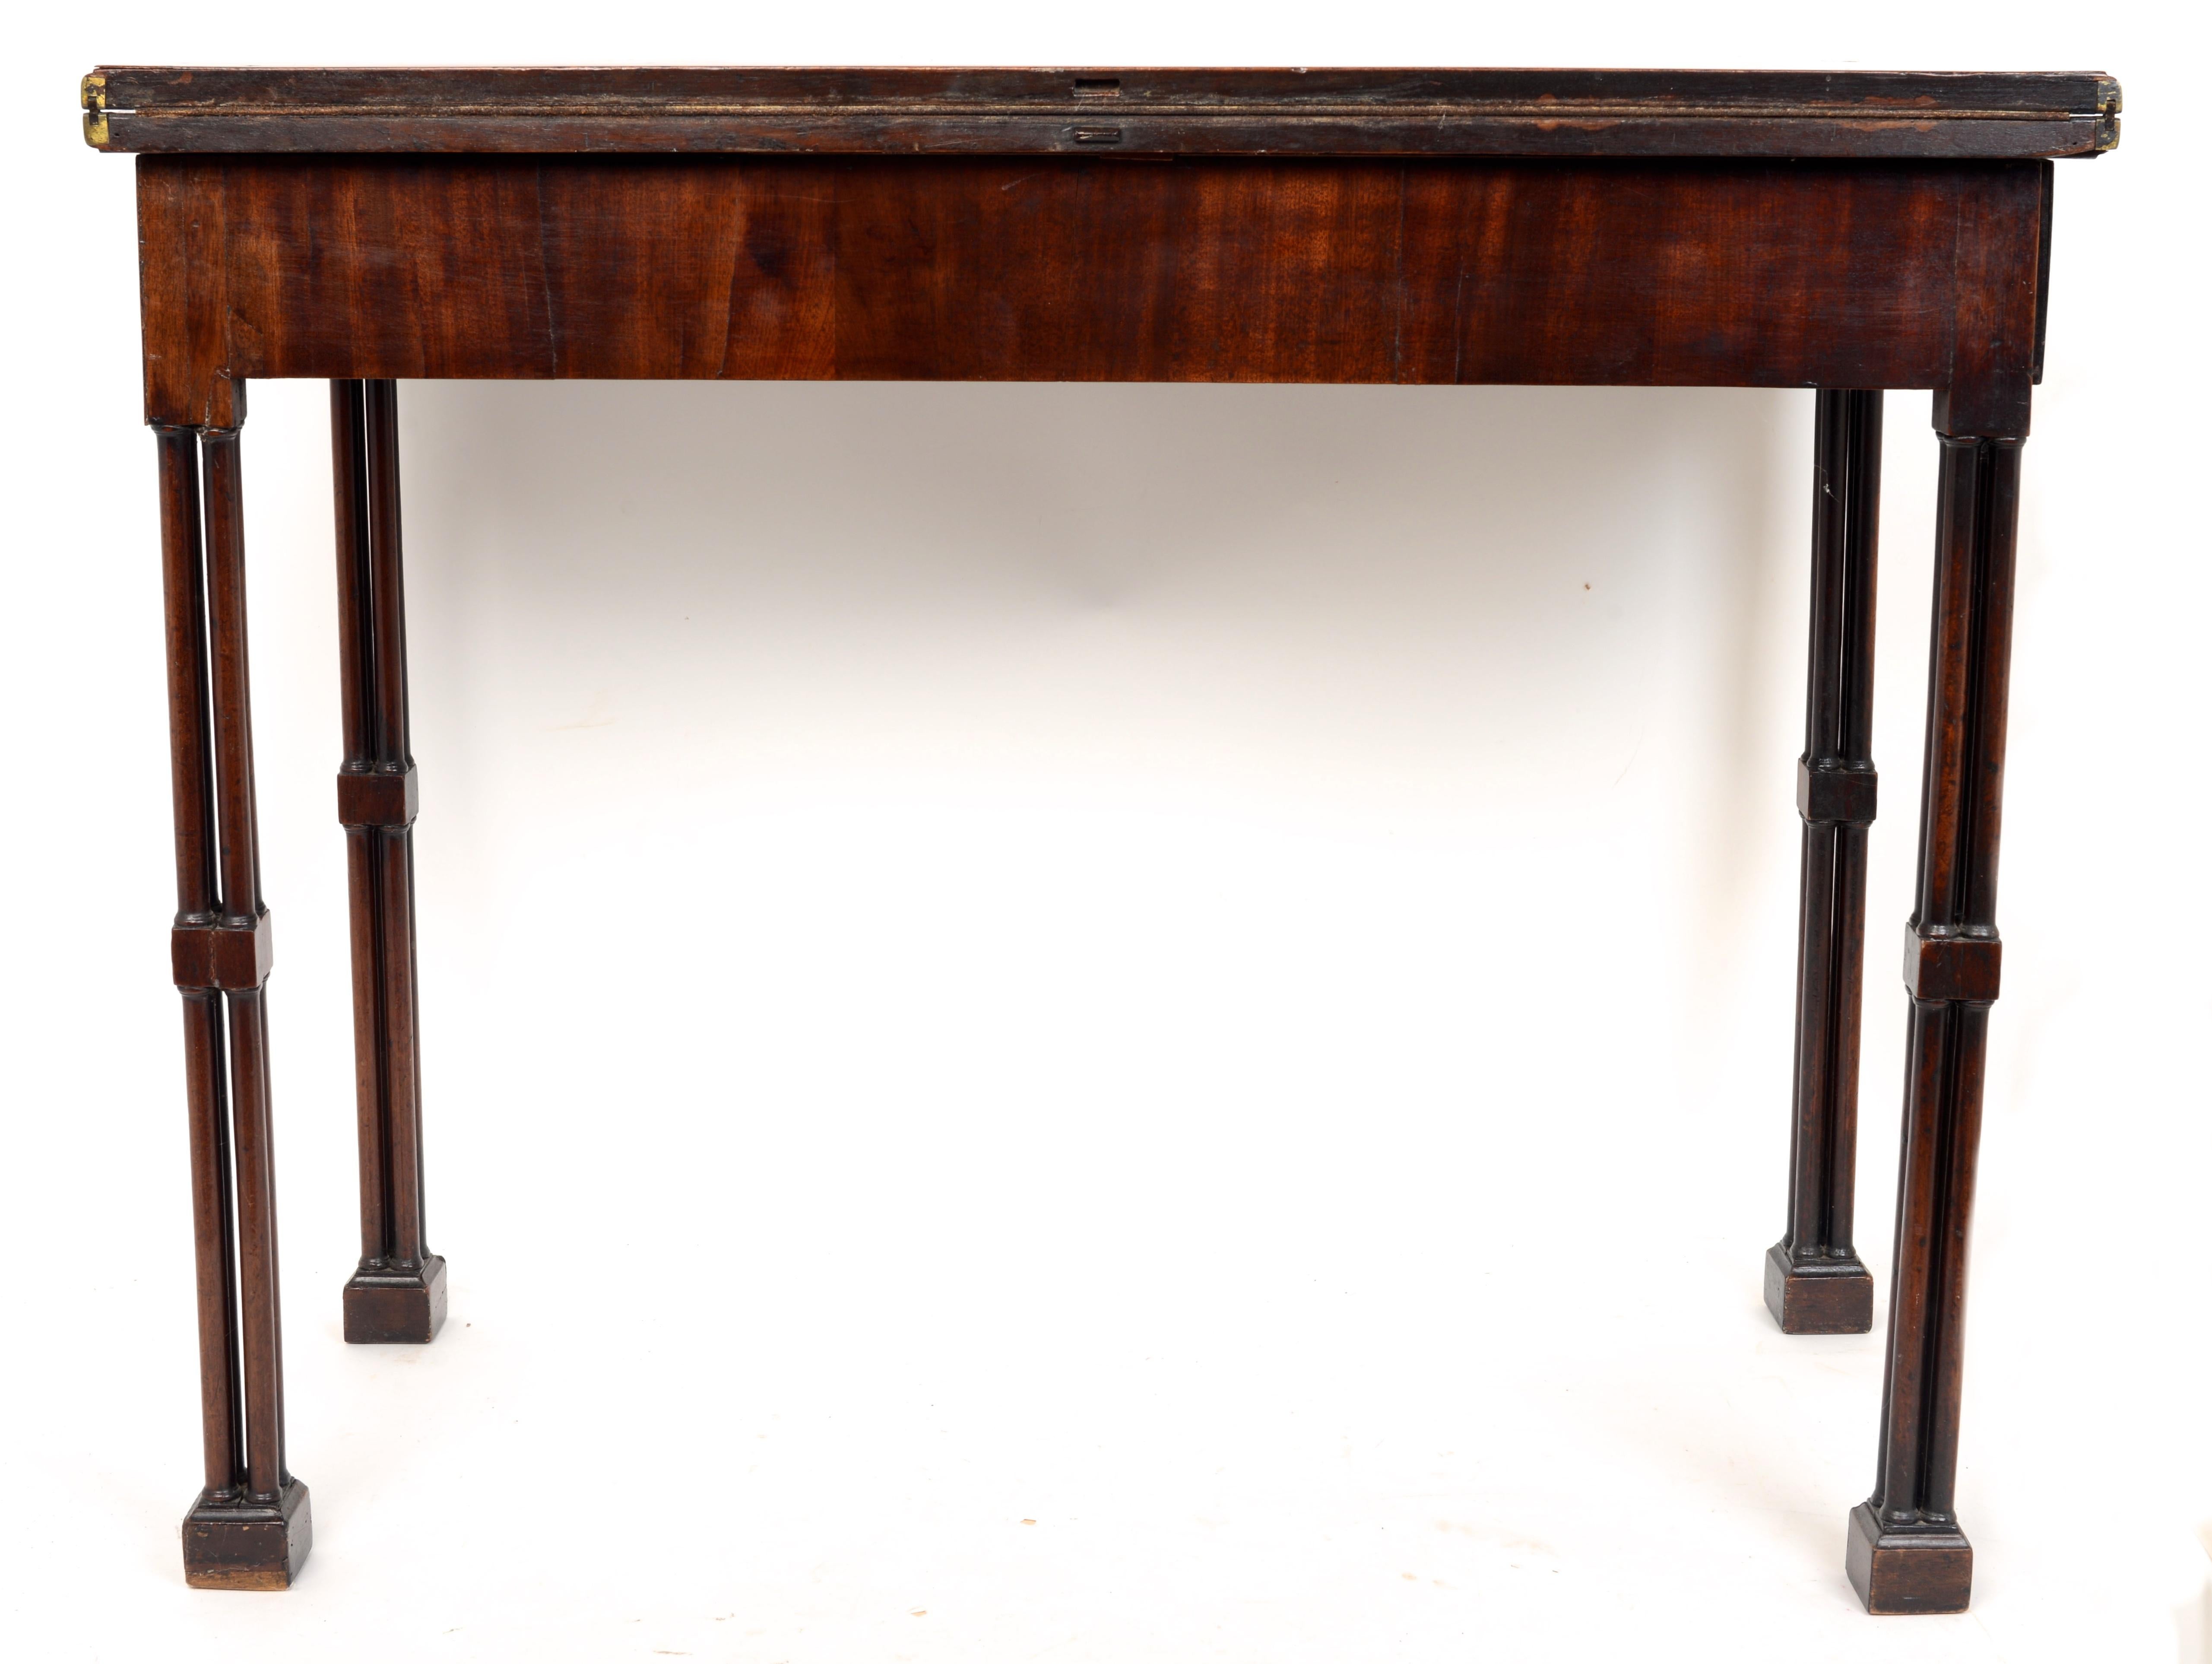 Geo III Mahogany Fold-Over Card Table with Cluster-Leg & Concertina Action c1780 For Sale 7